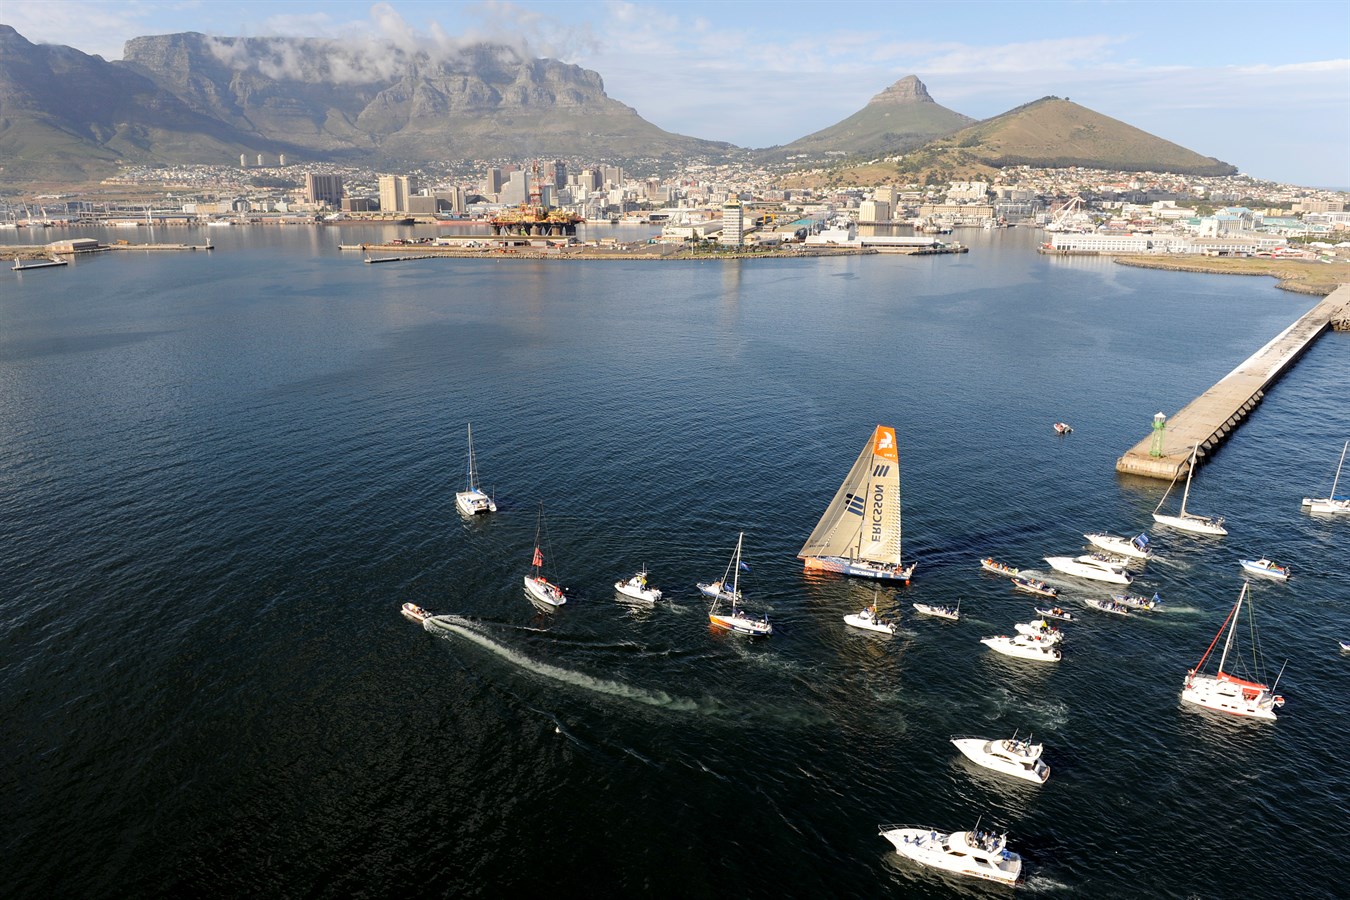 Ericsson 4 wins leg one of the Volvo Ocean Race into Cape Town, 2 November 2008